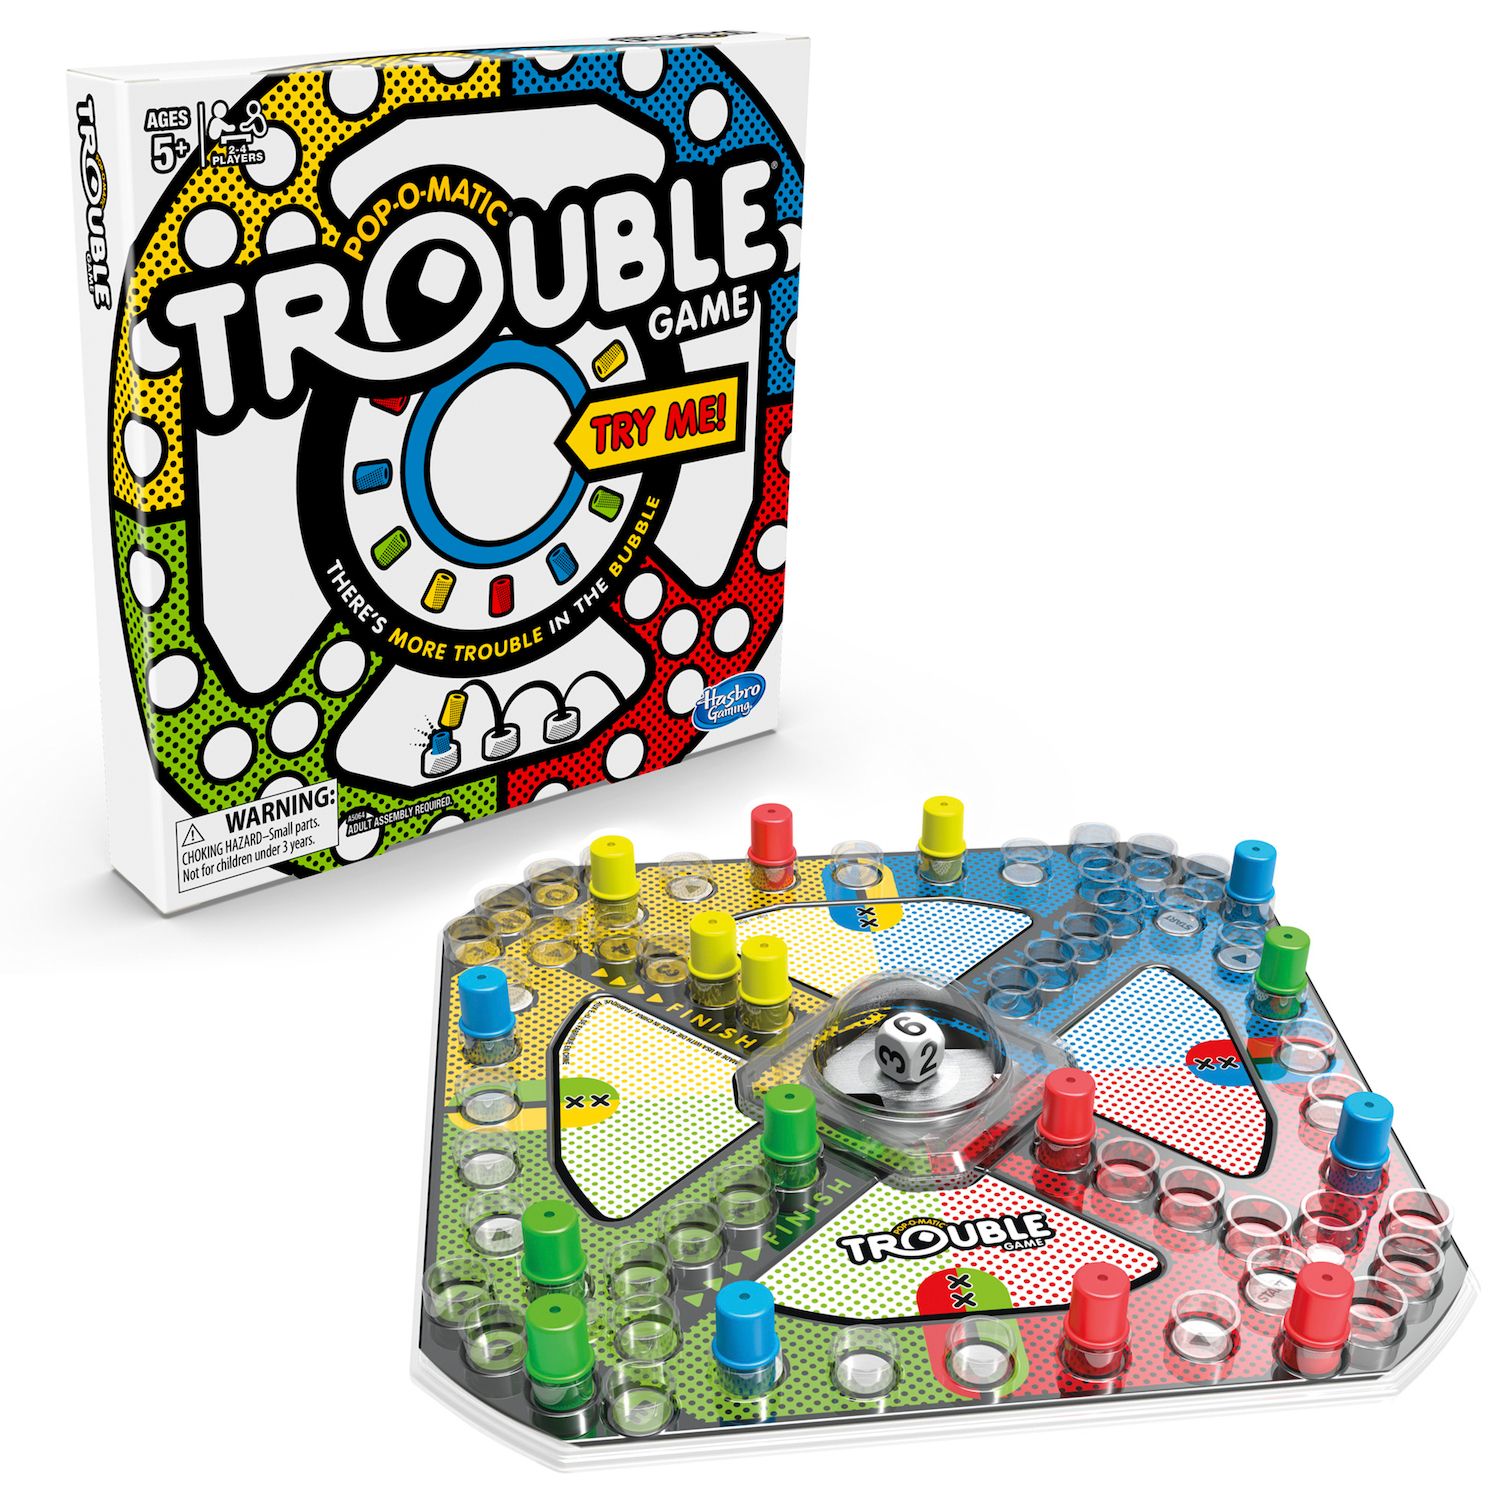 Image for Hasbro Trouble Game by at Kohl's.